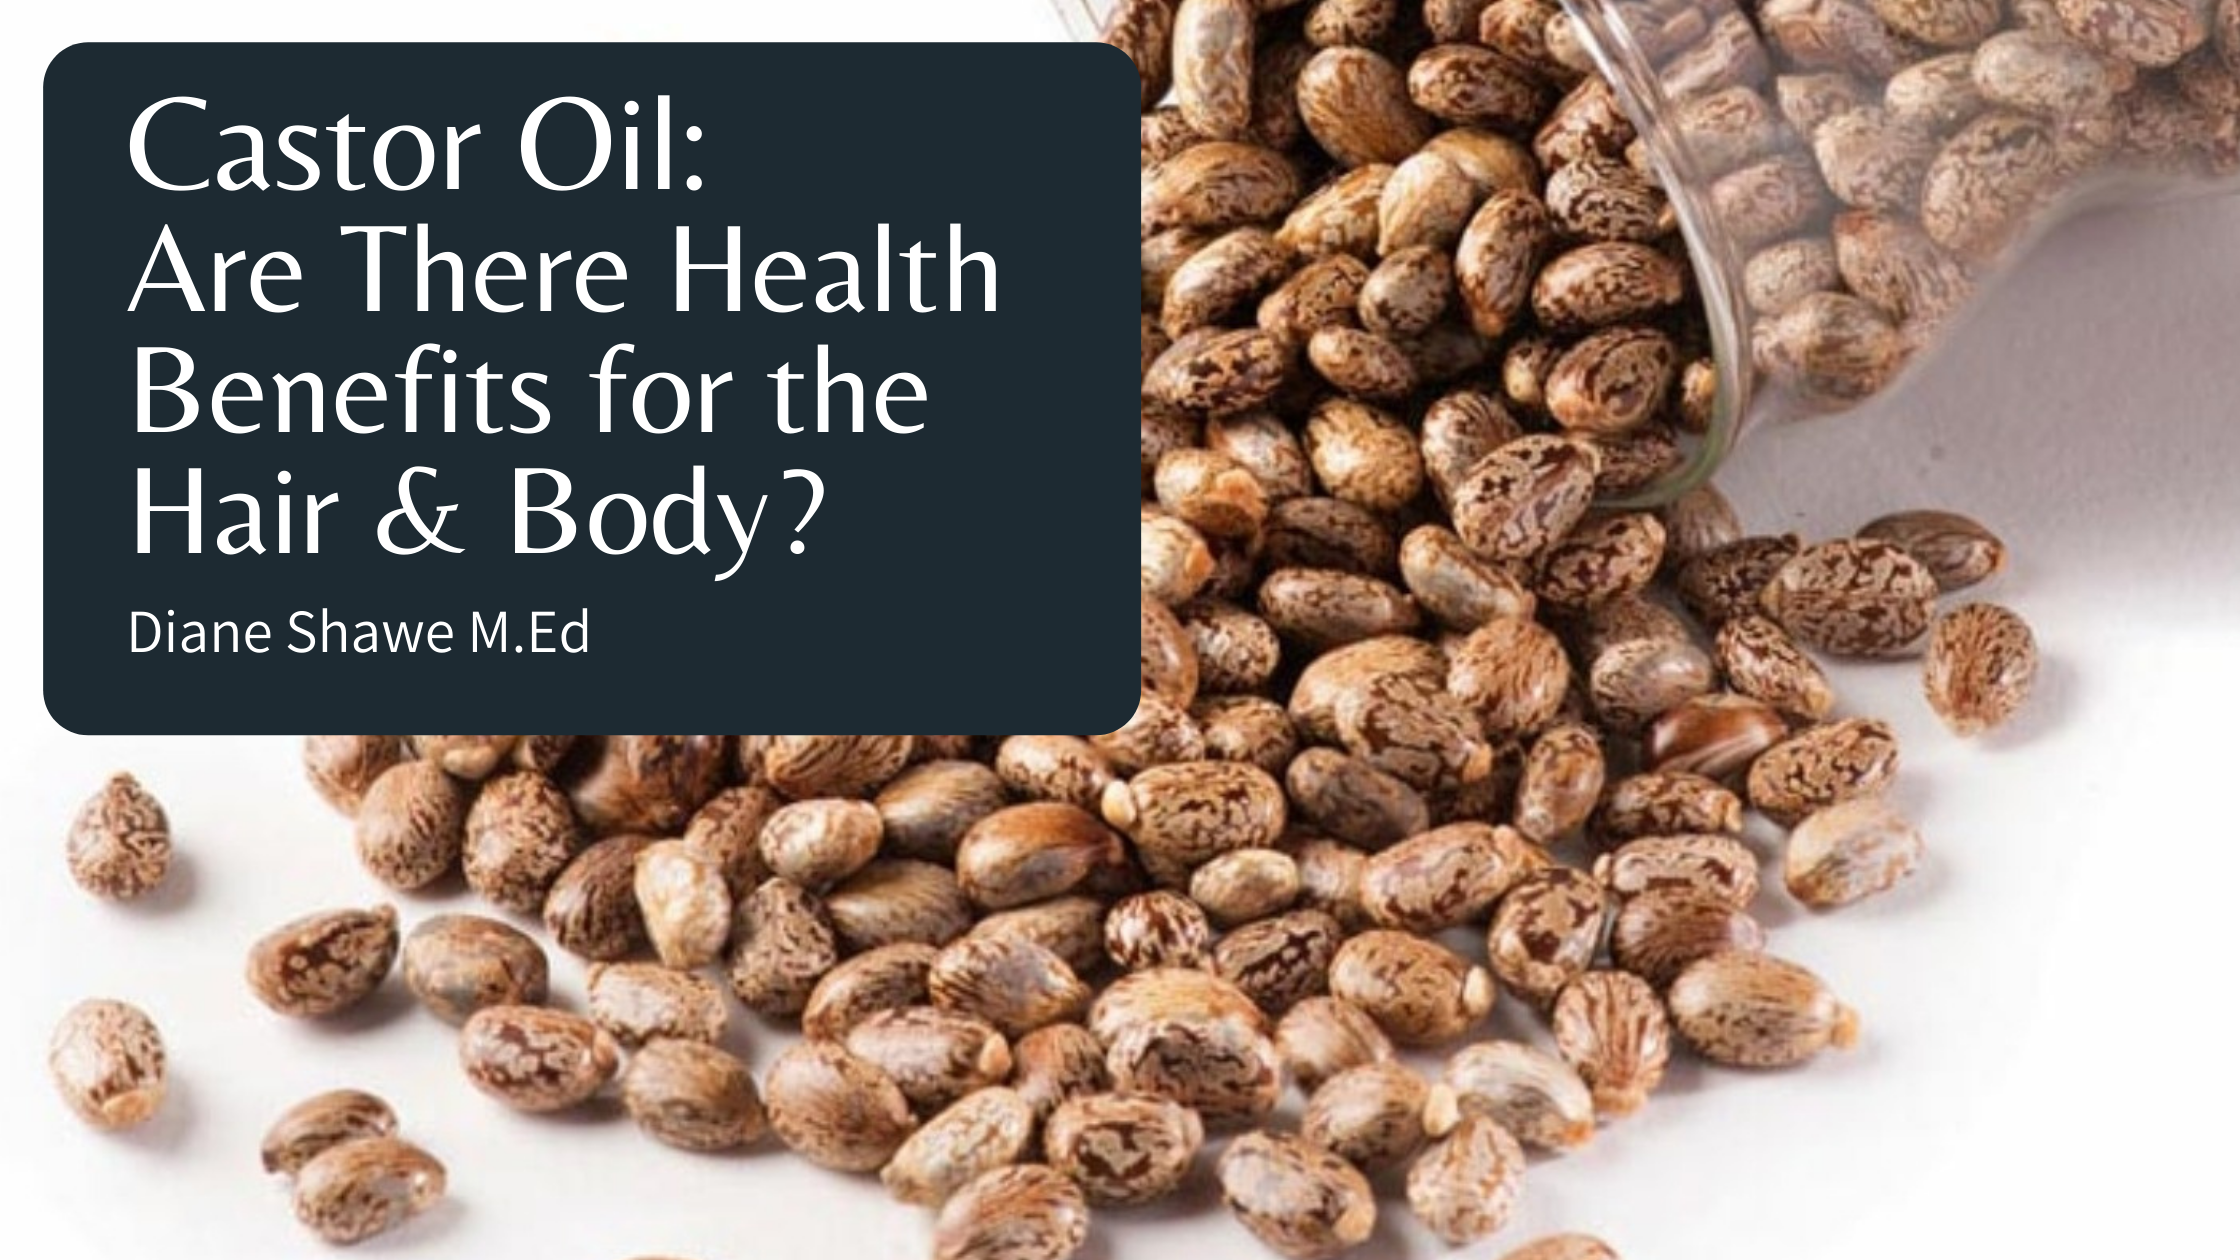 Castor Oil: Are There Health Benefits for the Hair & Body? by Diane Shawe